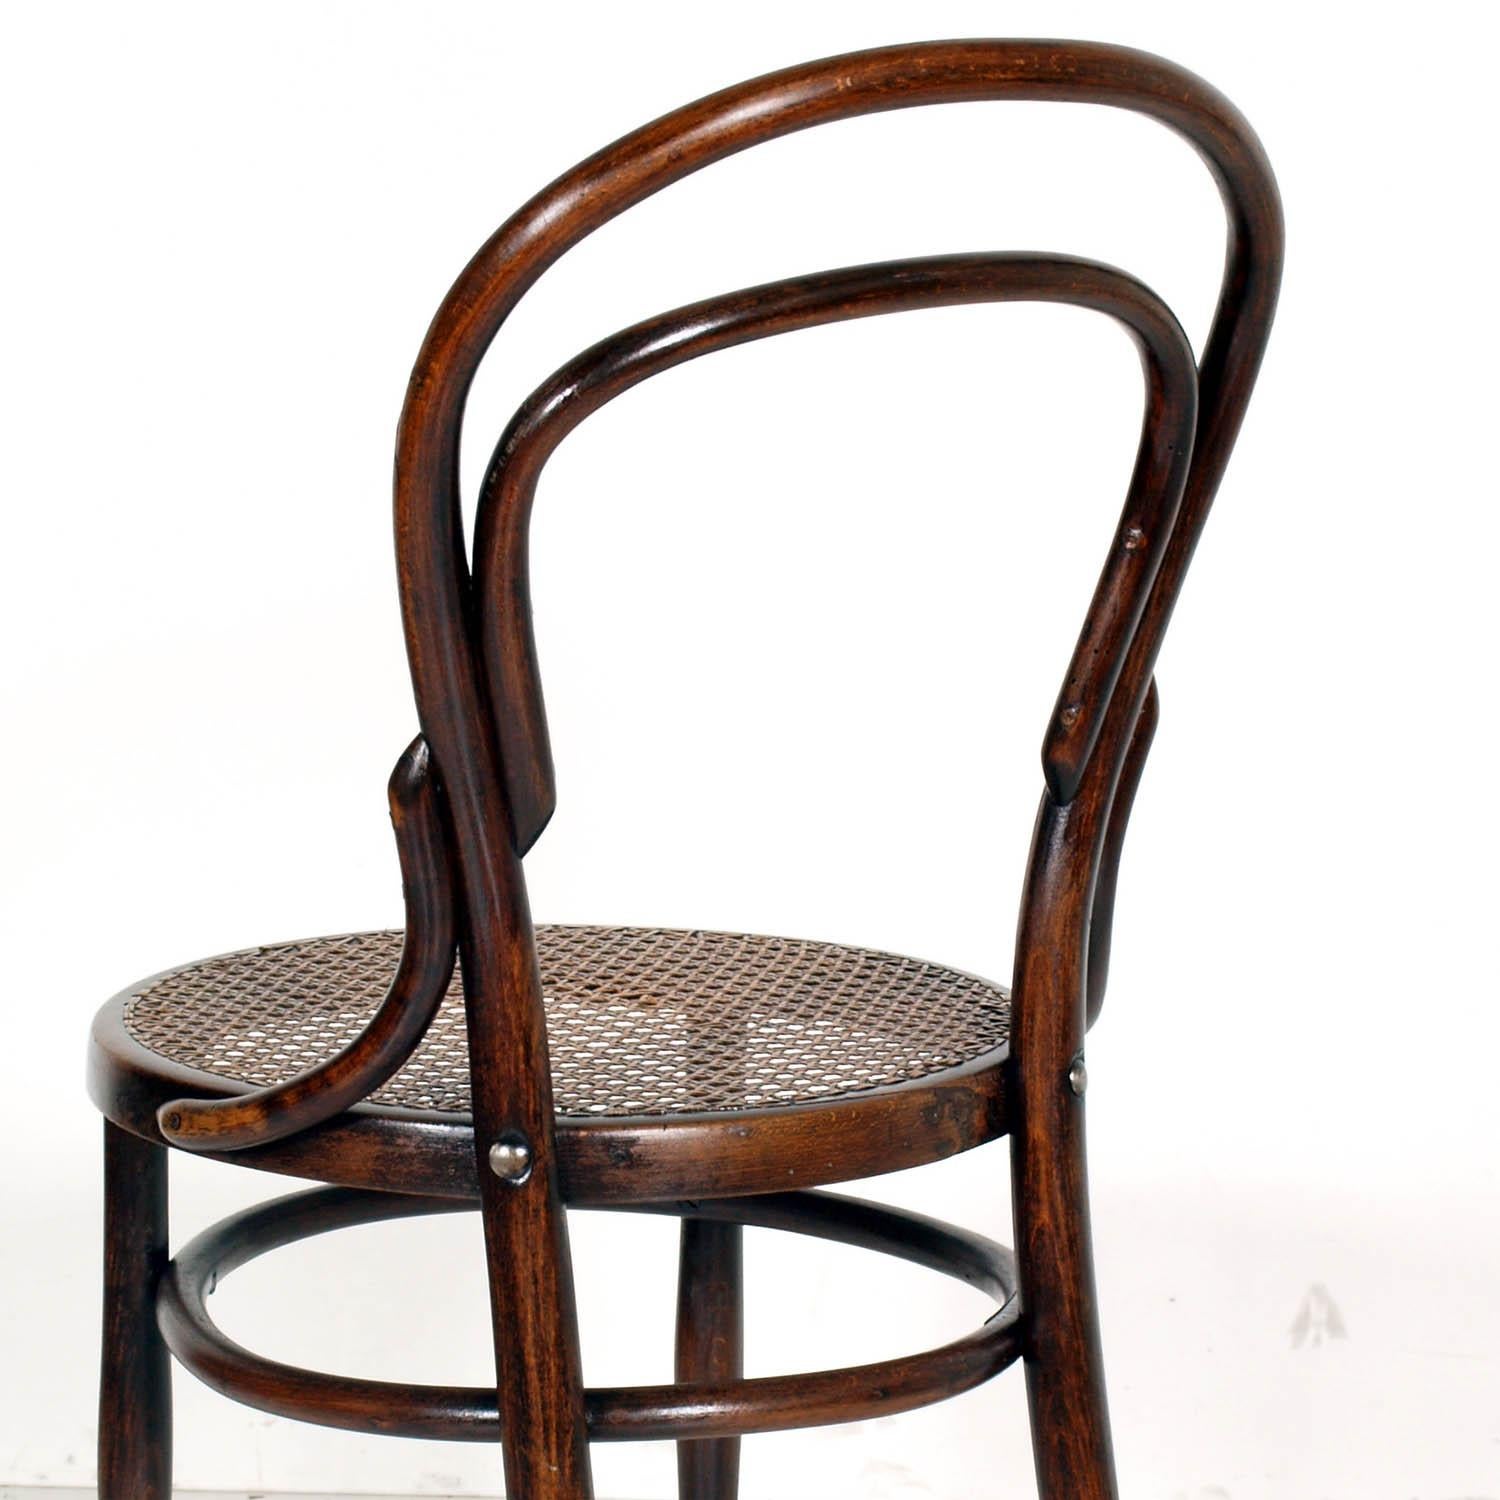 Early 20th century matched pair of classic bentwood Thonet chairs catalogue number 14, in excellent condition. Restored and polished to shellac.